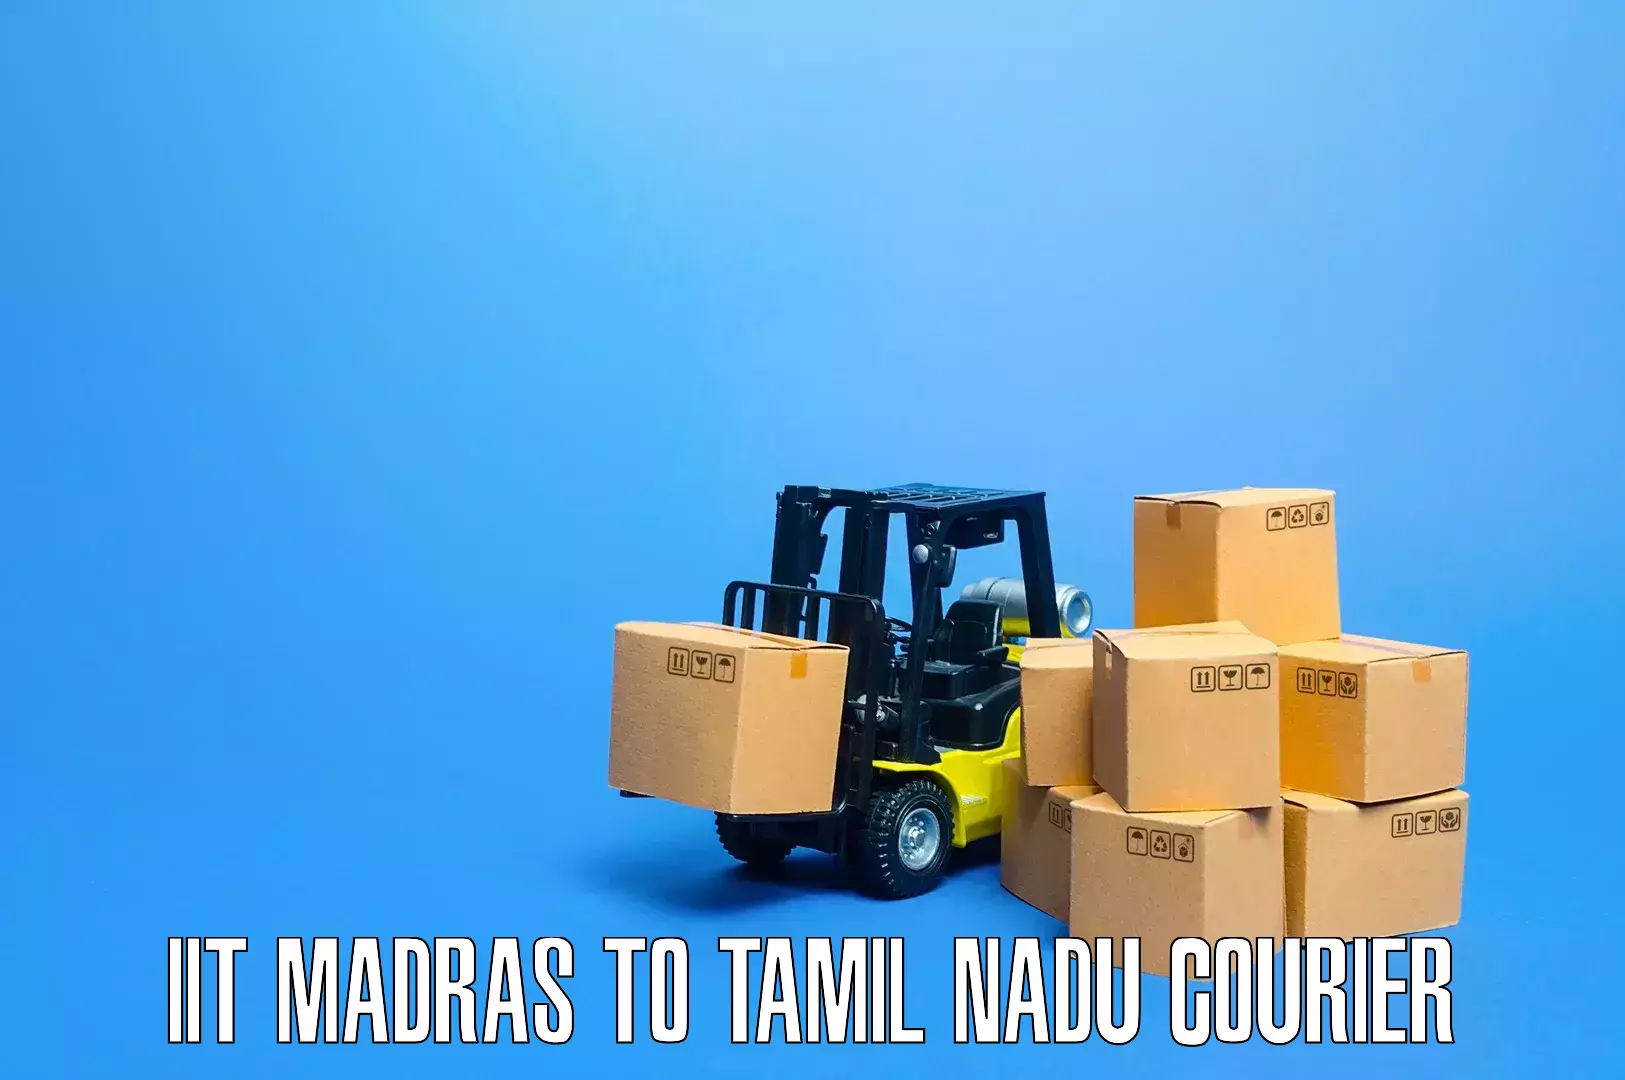 Furniture delivery service IIT Madras to Manamelkudi